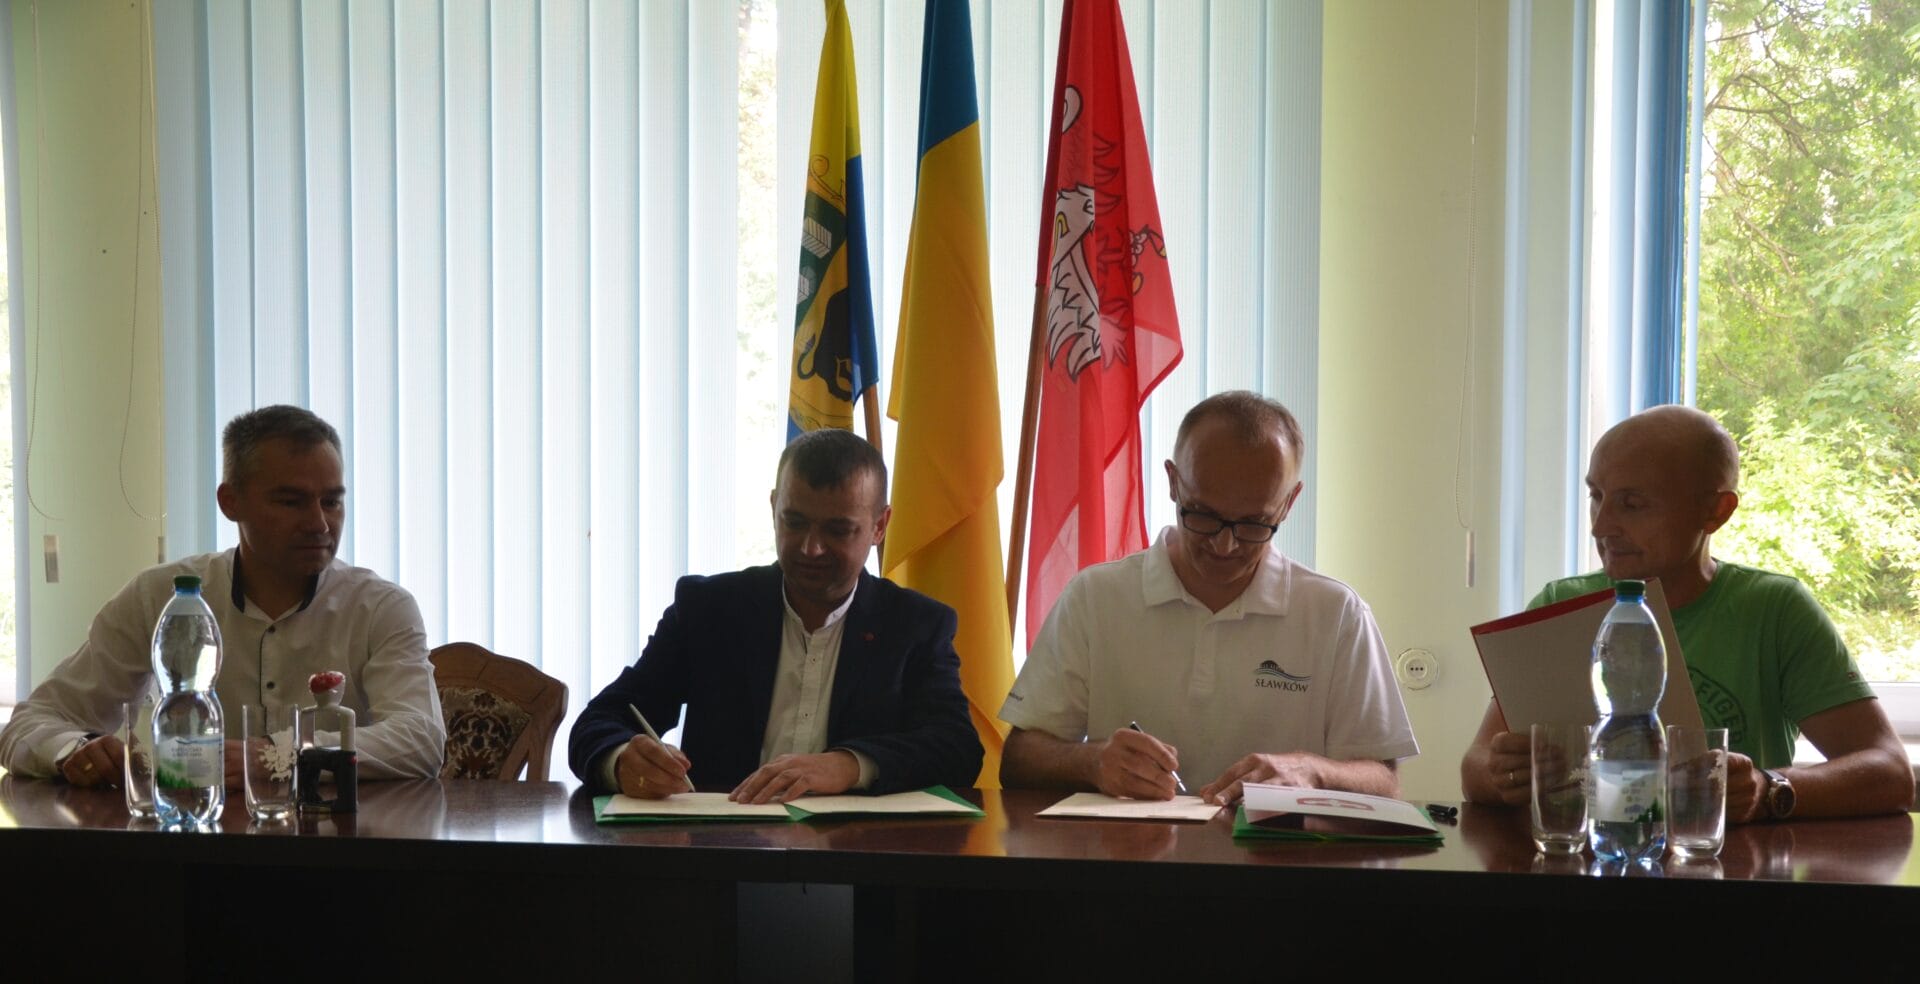 The head of the community signs a partnership agreement with the mayor of Slavków